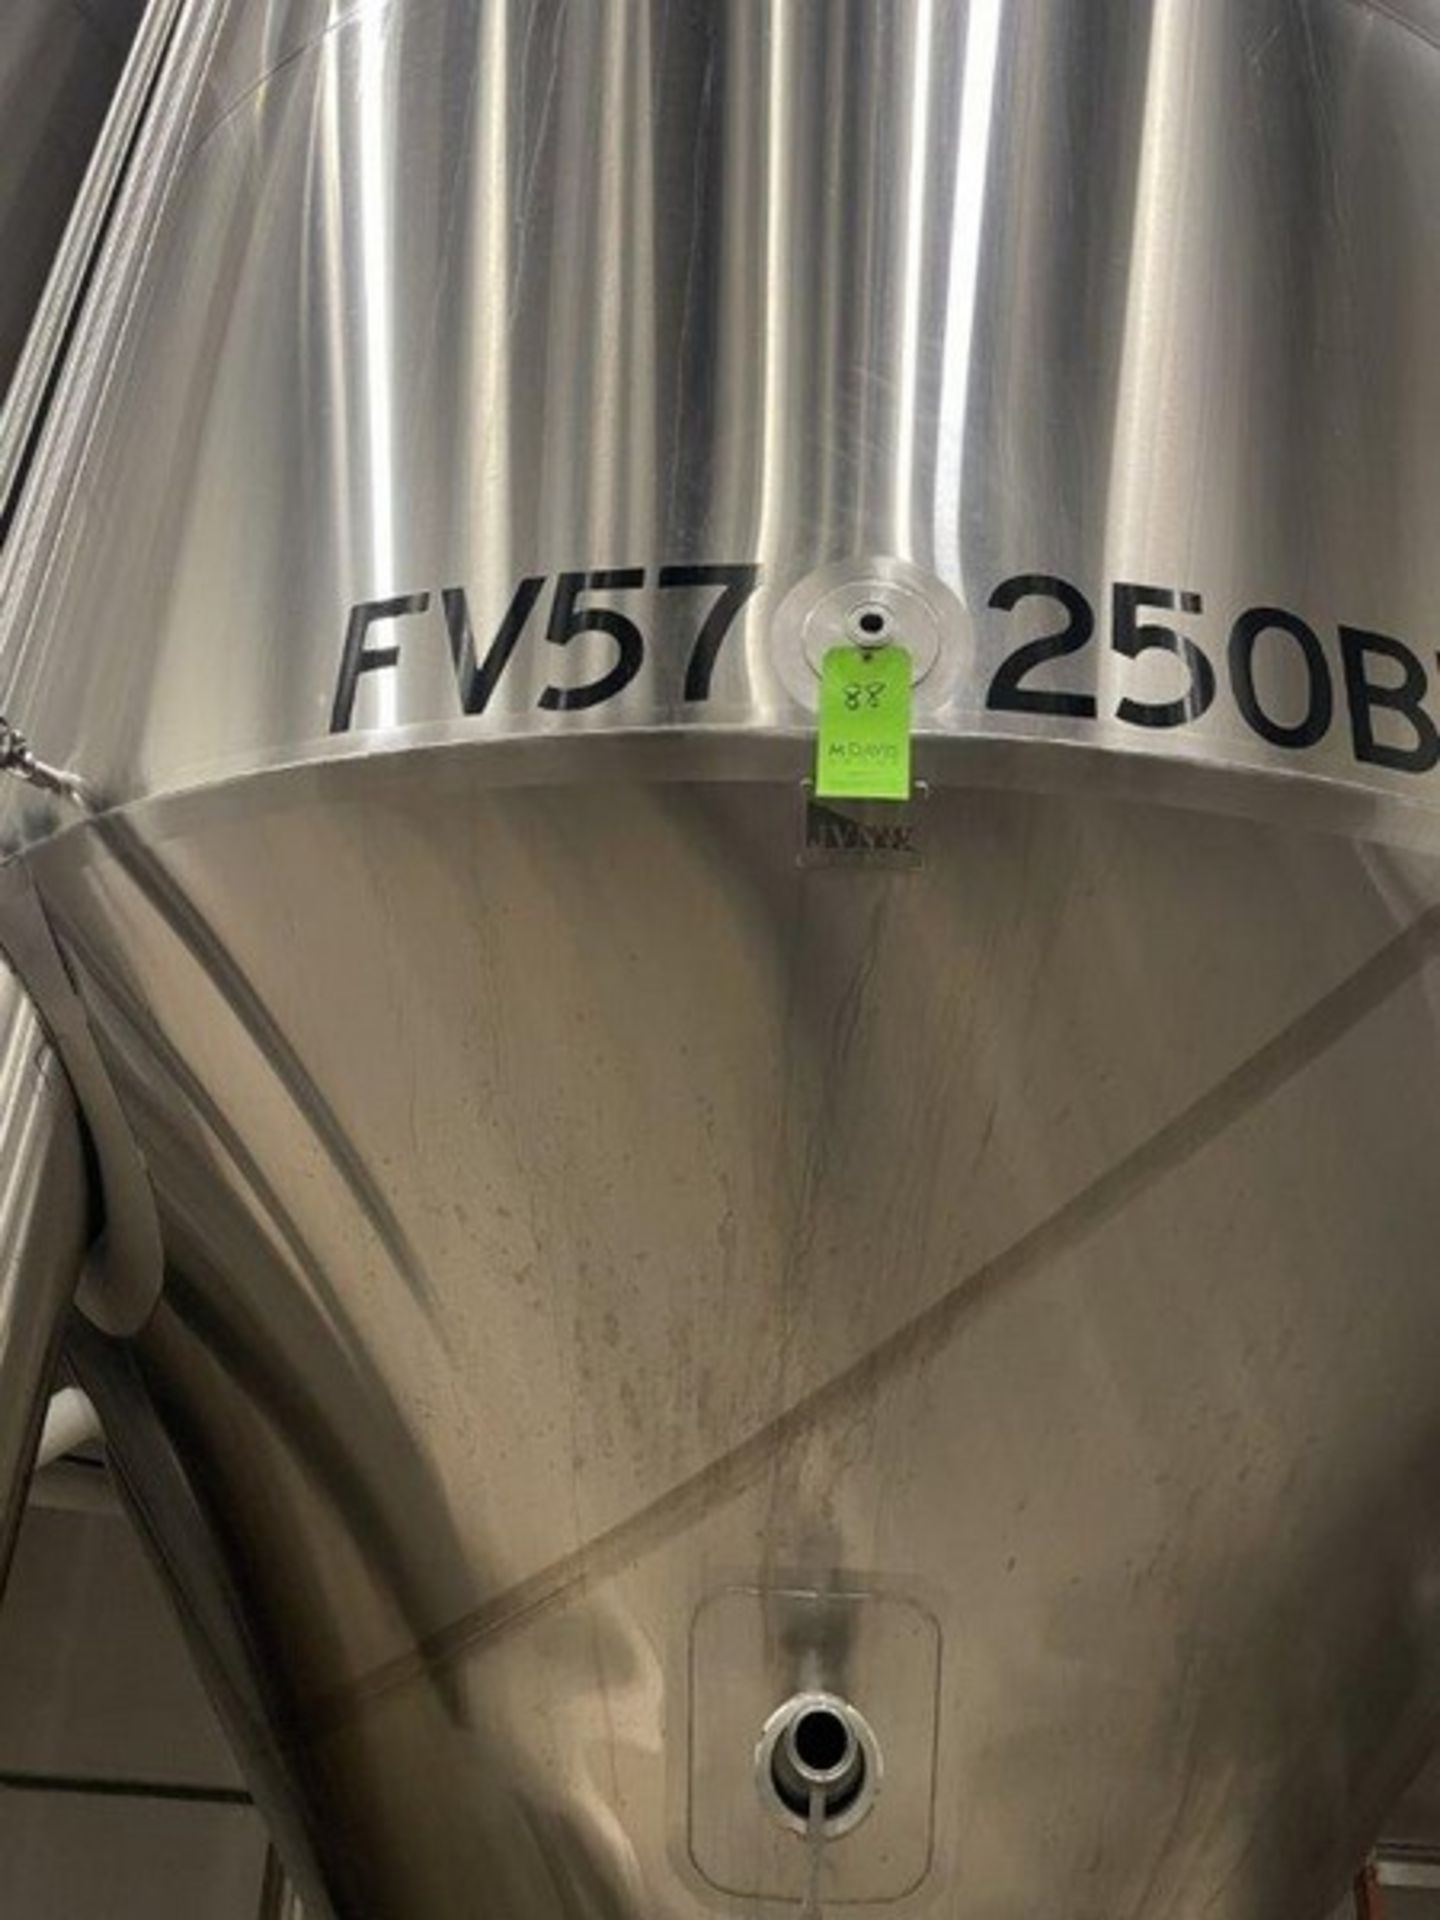 250 BBL (10178 Gallon) Vertical Cone Bottom 304 Stainless Steel Jacketed Vessel. Manufactured by JV - Image 6 of 7